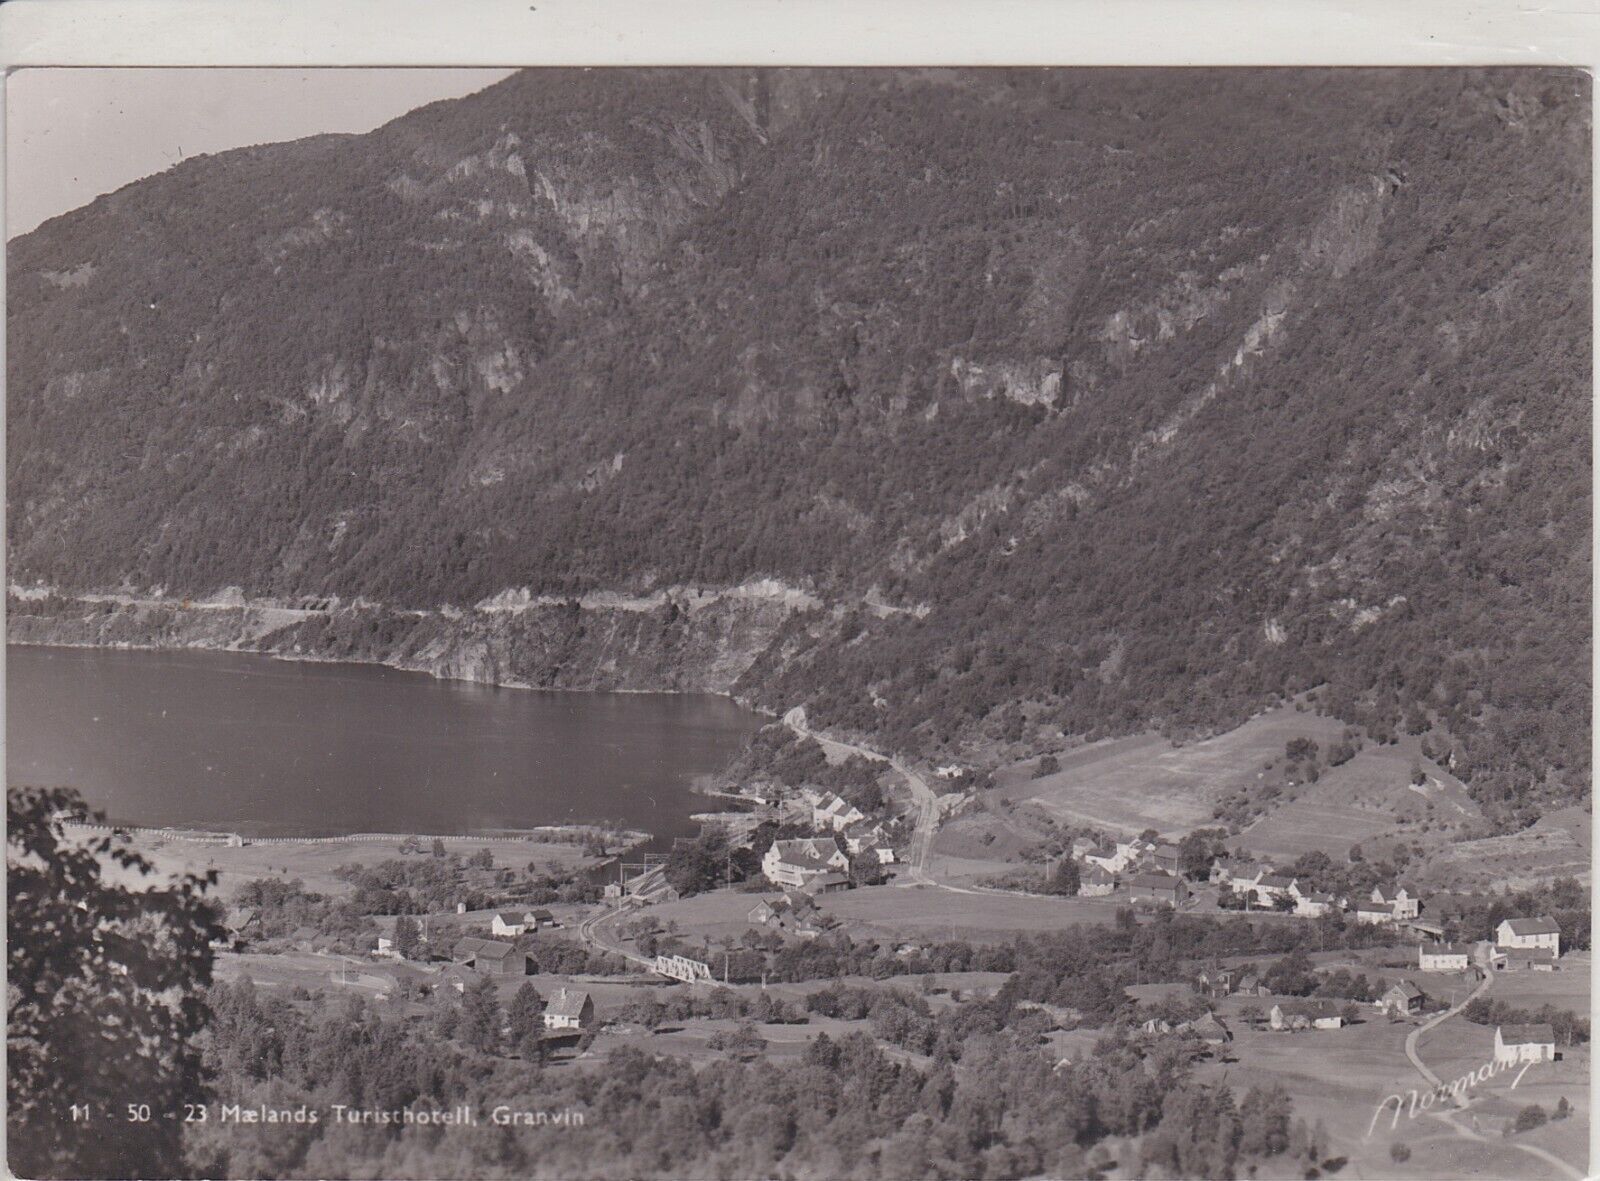 Granvin, Norway. Maelands Turisthotell.  Vintage Real Photo Postcard